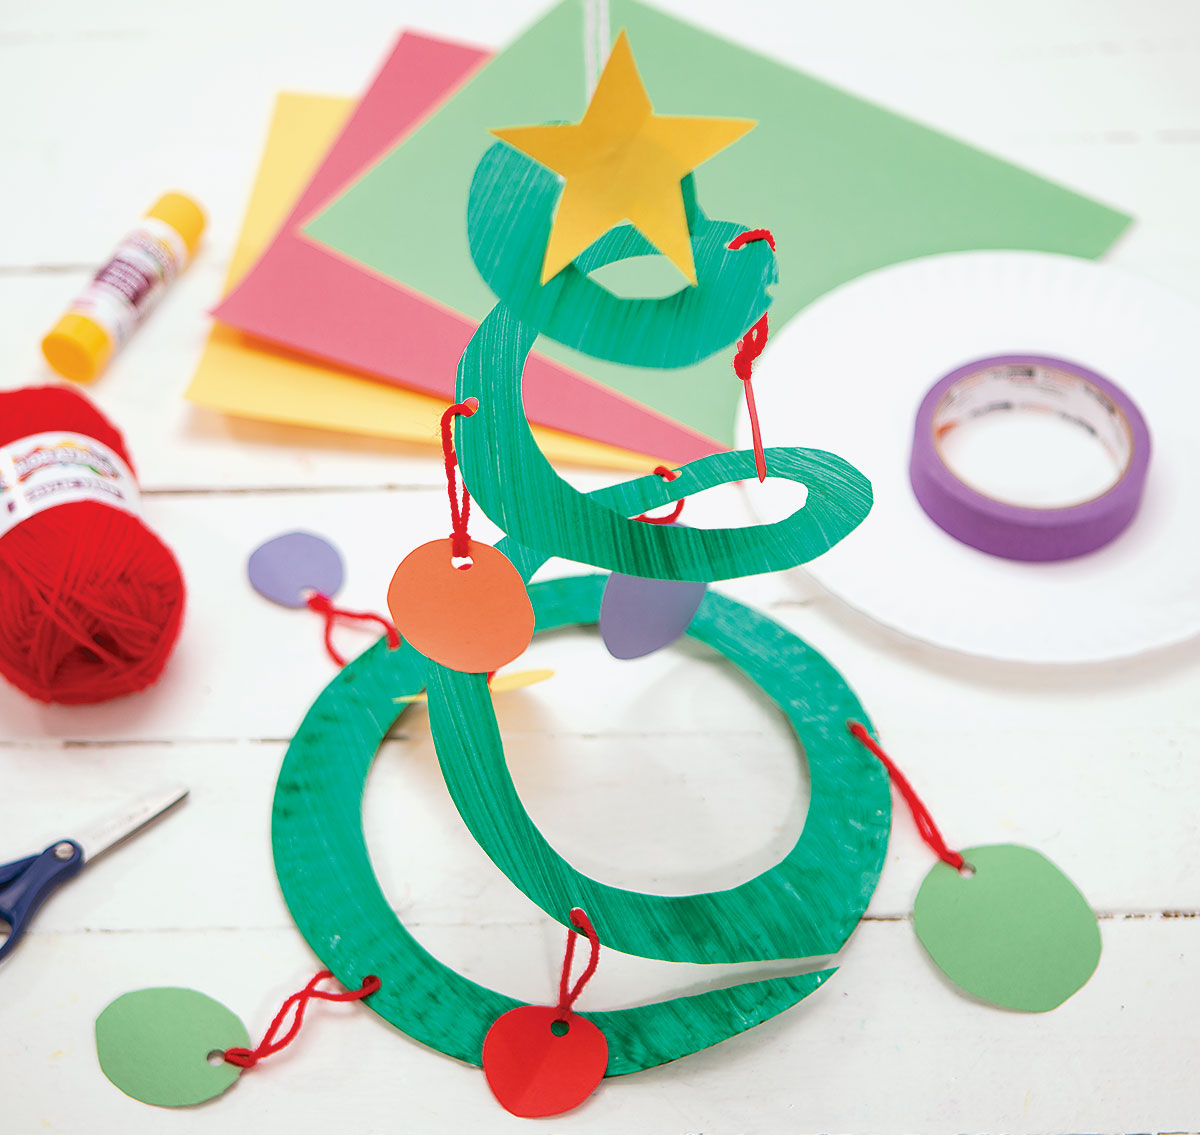 Christmas Tree Spiral Creative Craft Activity for the Holidays